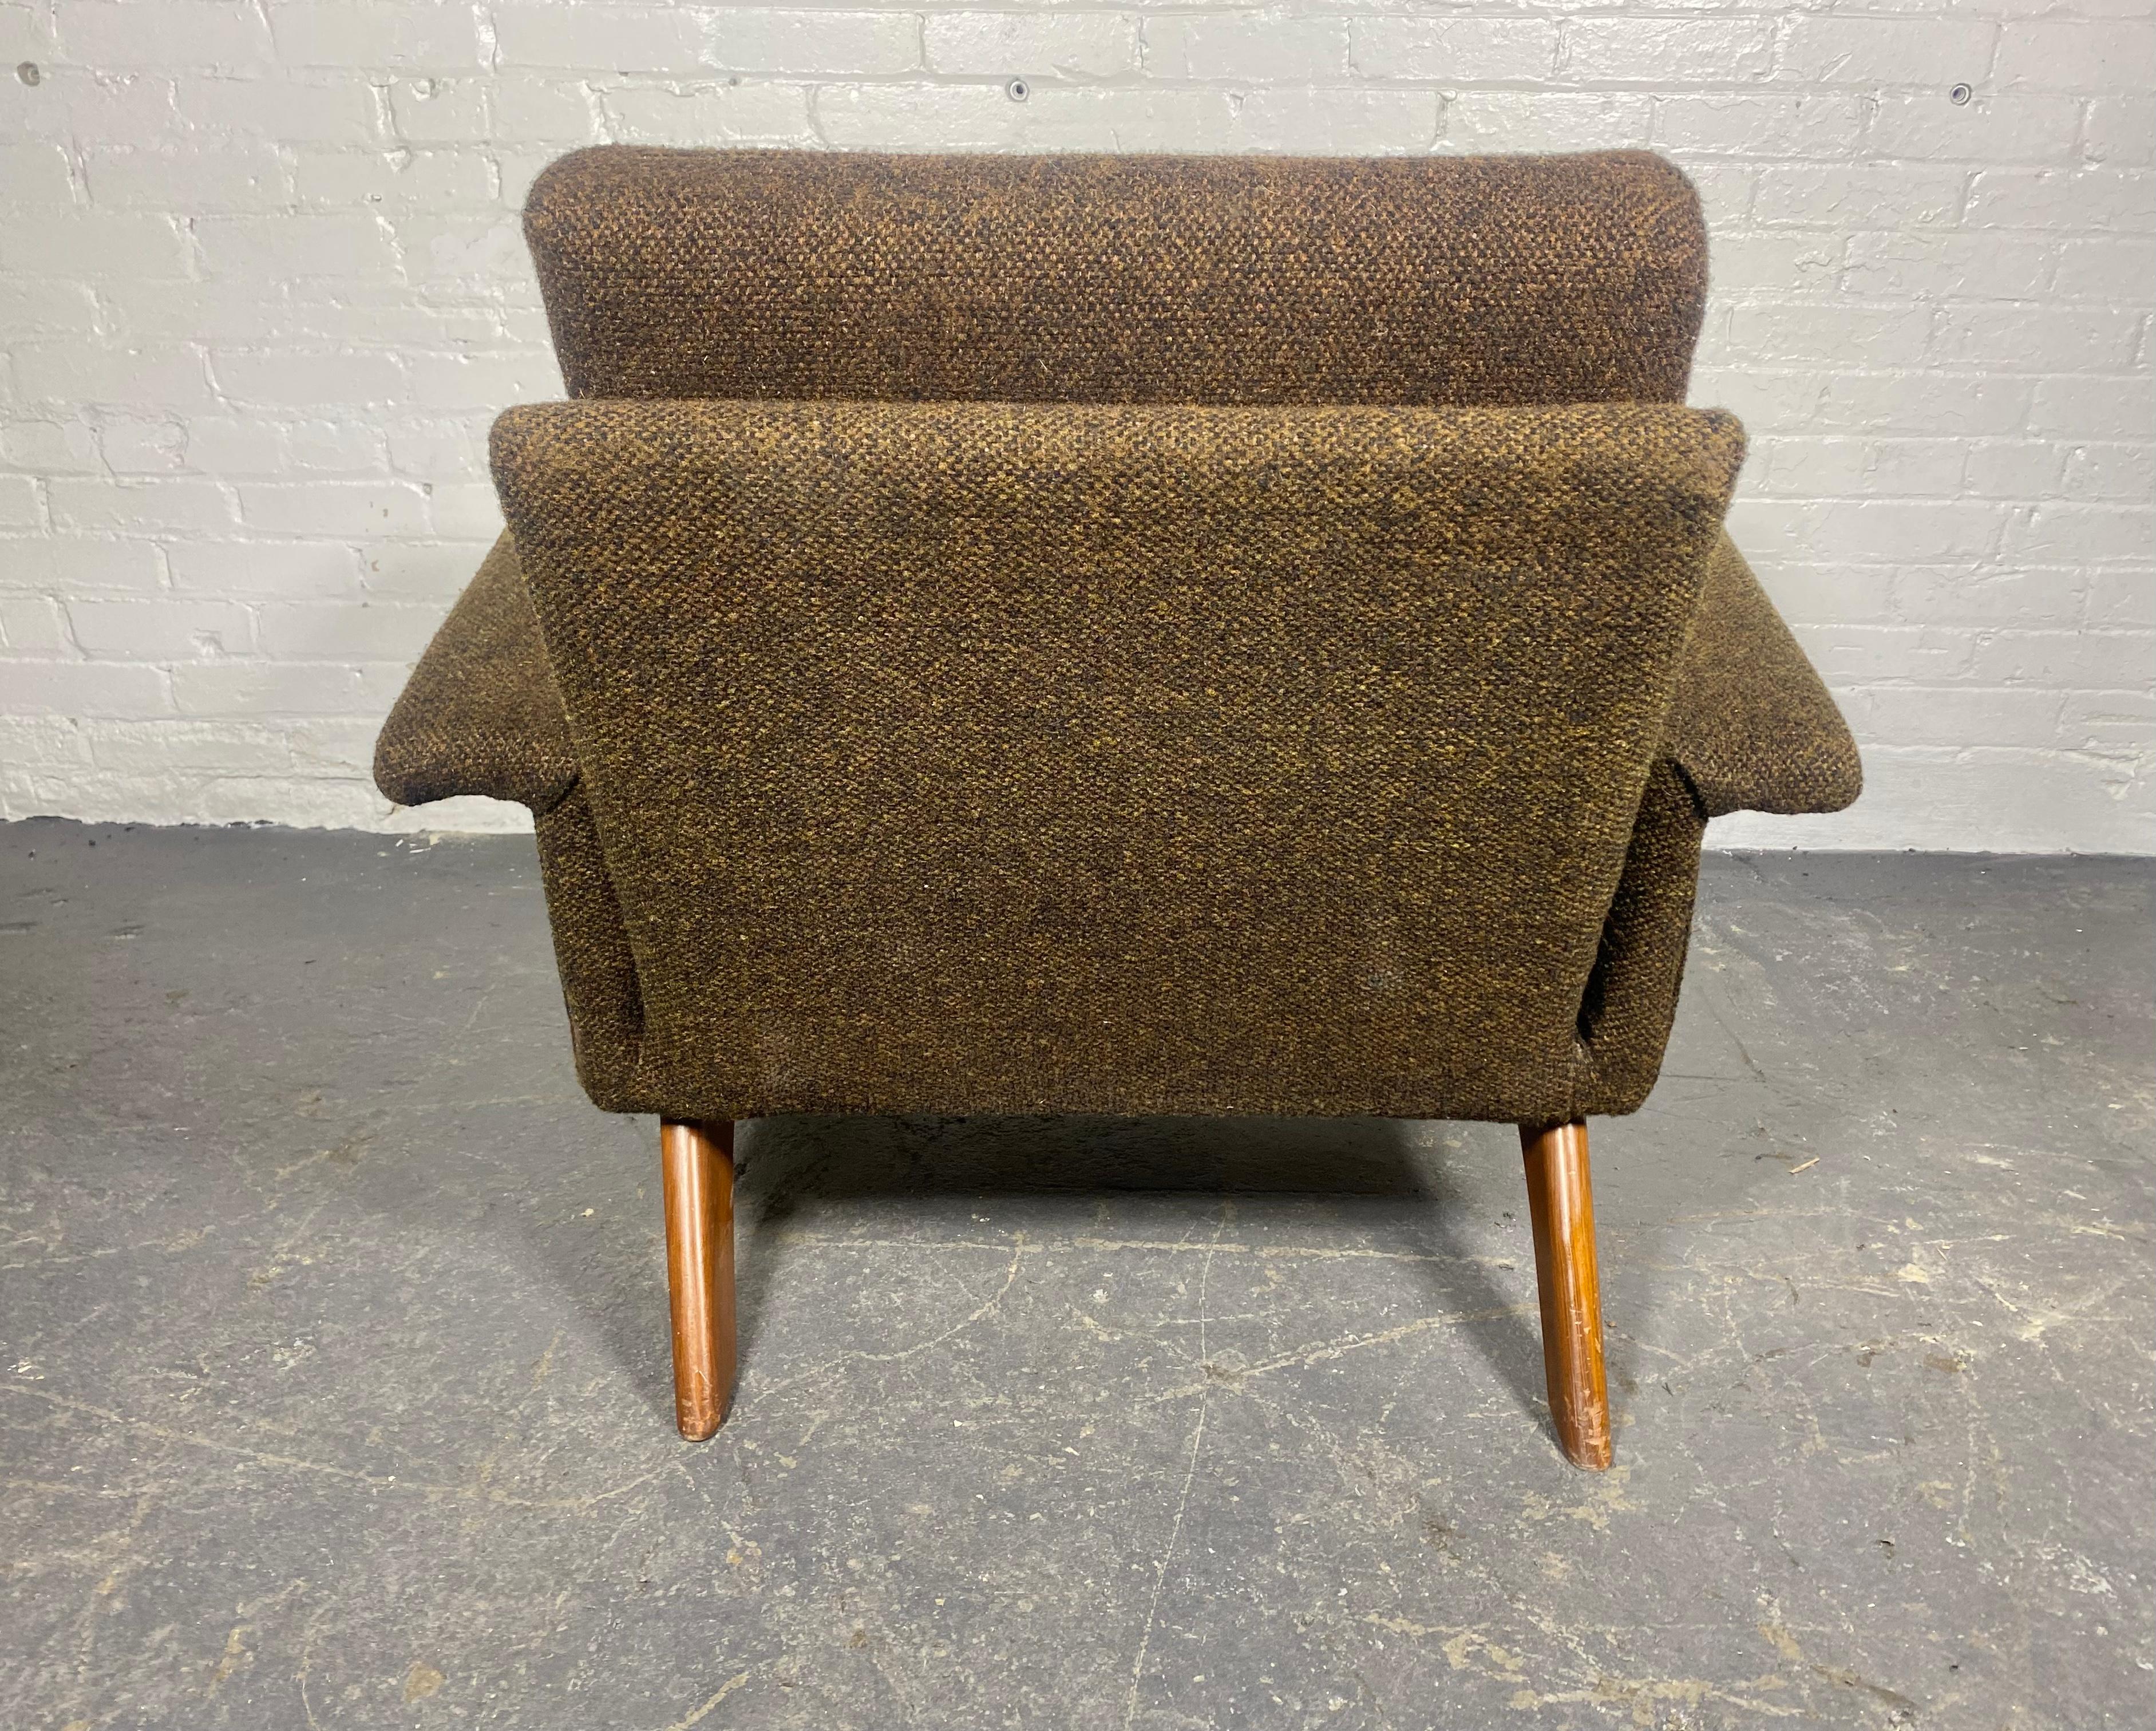 American Dramatic Modernist Lounge Chair by Adrian Pearsall.Sculptural Walnut Base. For Sale